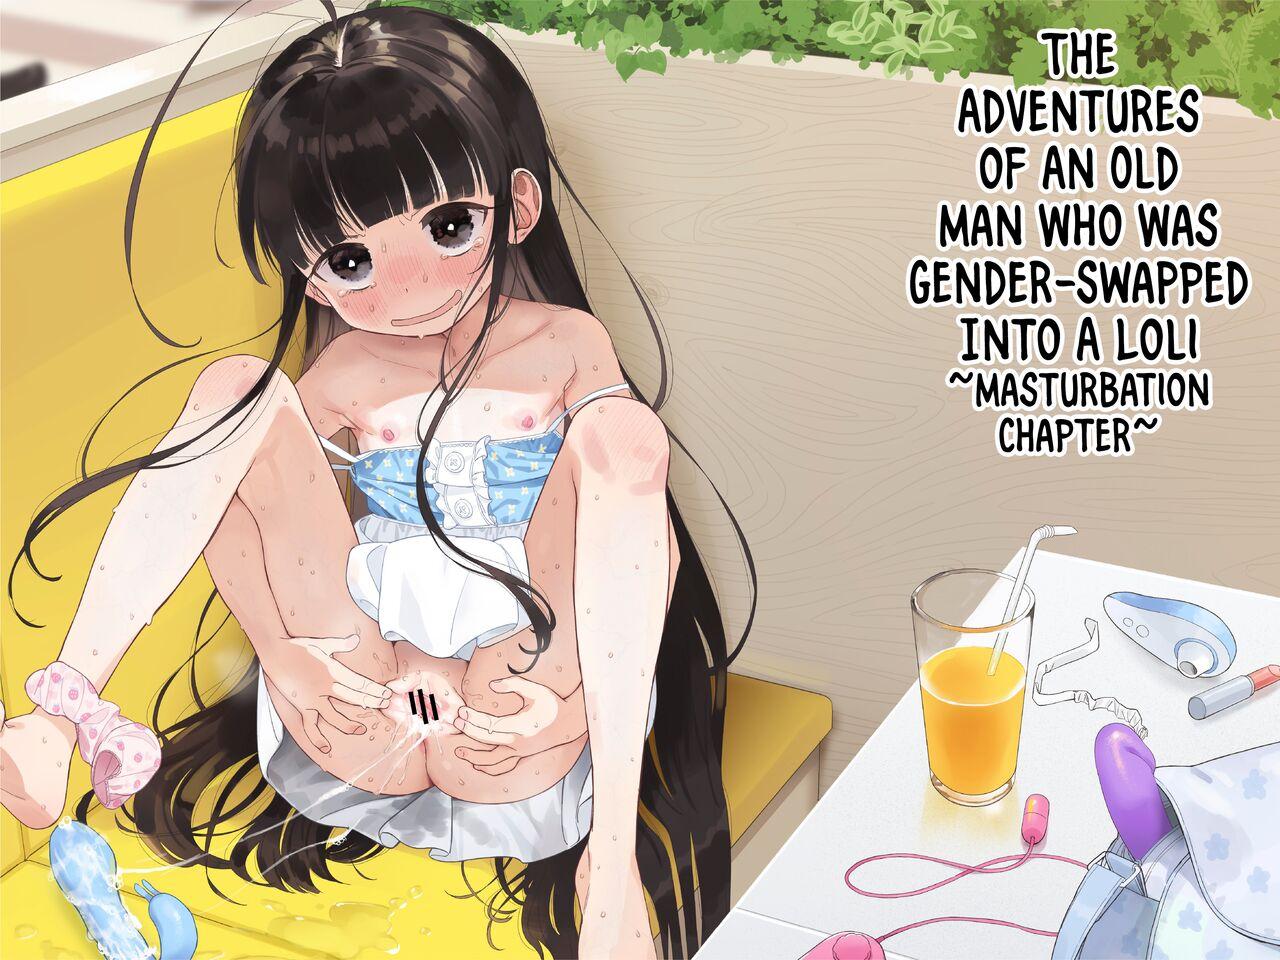 Free Porn Amateur [Asunaro Neat. (Ronna)] TS Loli Oji-san no Bouken Onanie Hen | The Adventures of an Old Man Who Was Gender-Swapped Into a Loli ~Masturbation Chapter~ [English] [CulturedCommissions] [Digital] - Original Travesti - Picture 1